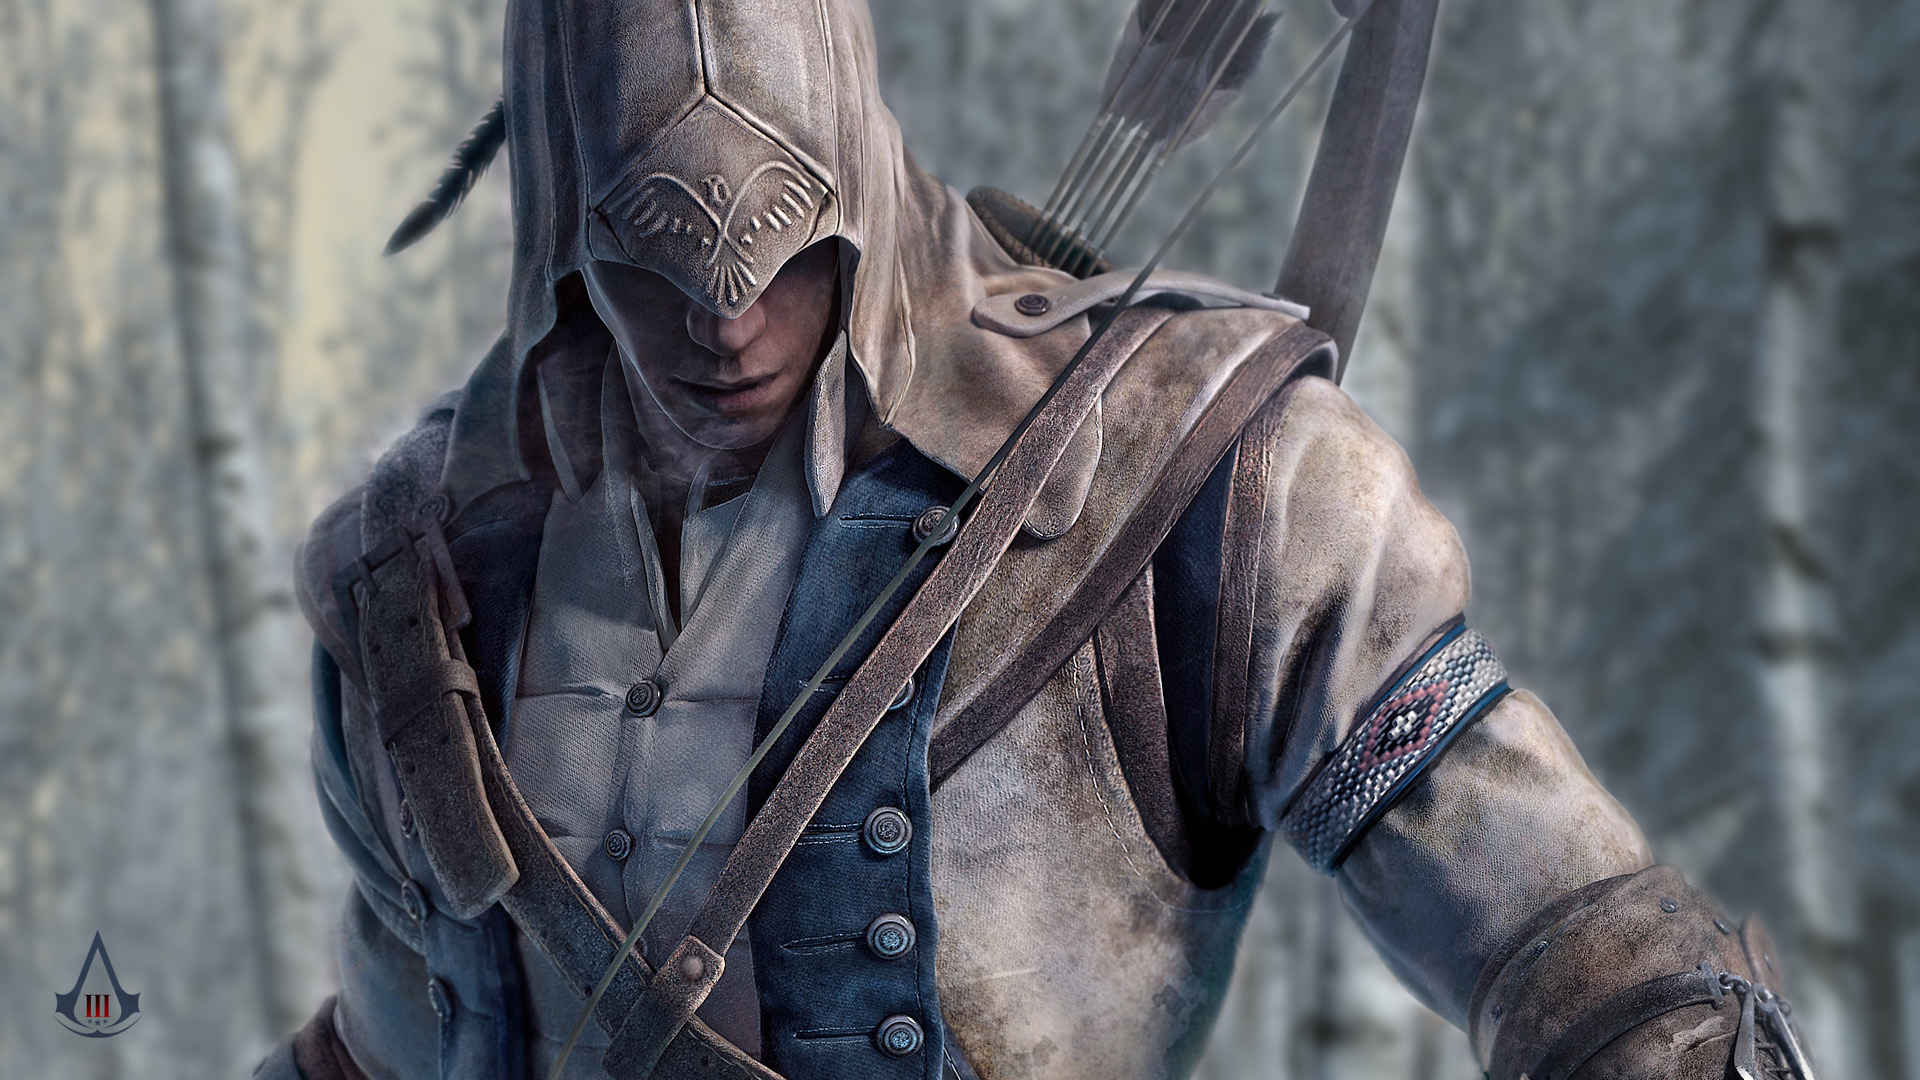 Wallpaper Full HD video game, assassin's creed iii, assassin's creed